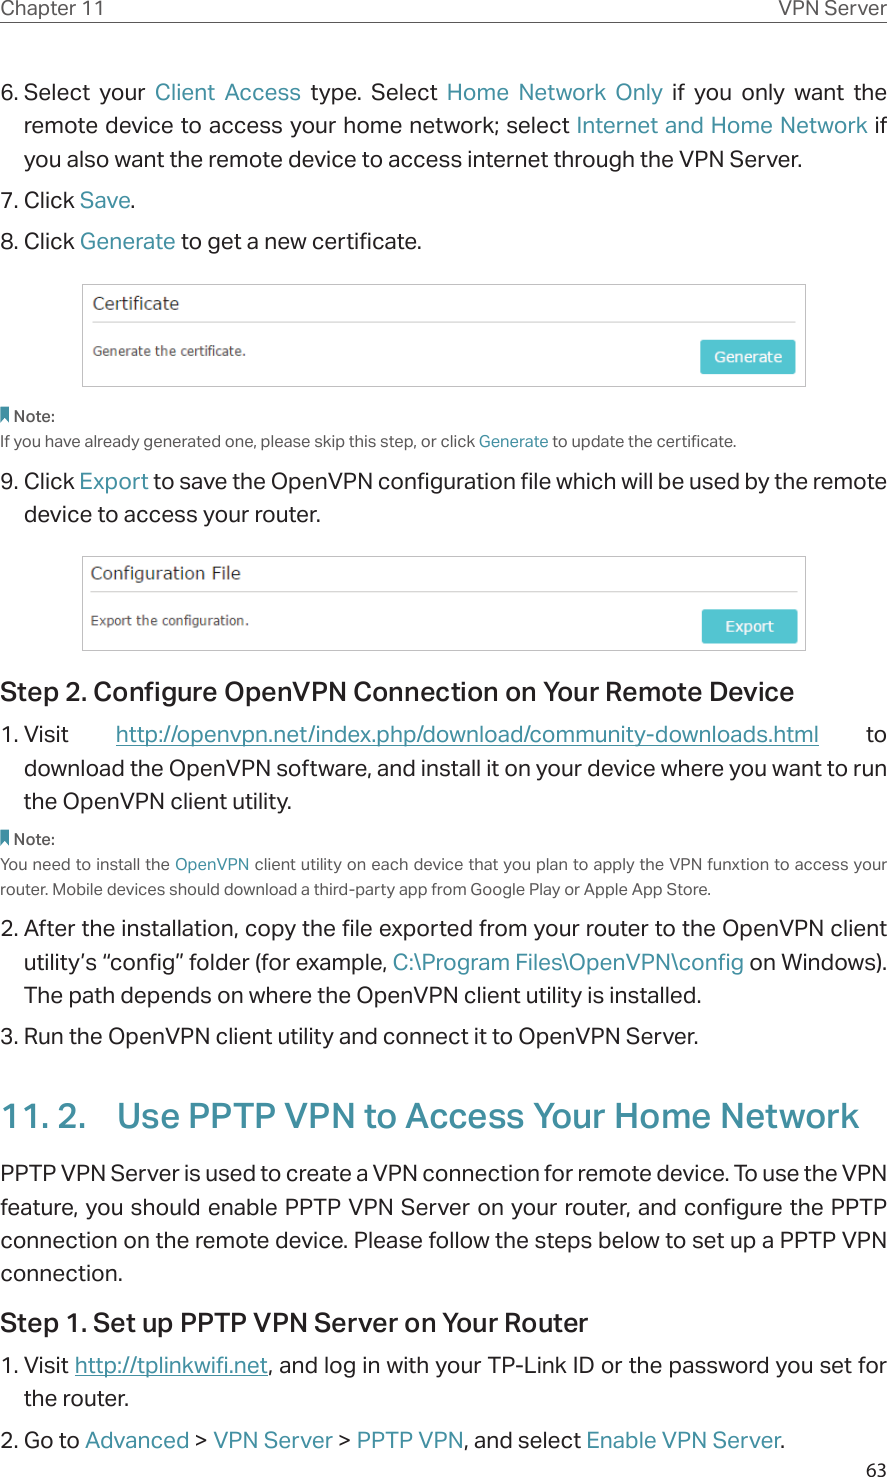 63Chapter 11 VPN Server6. Select  your  Client Access type. Select Home Network Only if you only want the remote device to access your home network; select Internet and Home Network if  you also want the remote device to access internet through the VPN Server.7. Click Save.8. Click Generate to get a new certificate. Note:If you have already generated one, please skip this step, or click Generate to update the certificate.9. Click Export to save the OpenVPN configuration file which will be used by the remote device to access your router.Step 2. Configure OpenVPN Connection on Your Remote Device1. Visit  http://openvpn.net/index.php/download/community-downloads.html to download the OpenVPN software, and install it on your device where you want to run the OpenVPN client utility.Note:You need to install the OpenVPN client utility on each device that you plan to apply the VPN funxtion to access your router. Mobile devices should download a third-party app from Google Play or Apple App Store.2. After the installation, copy the file exported from your router to the OpenVPN client utility’s “config” folder (for example, C:\Program Files\OpenVPN\config on Windows). The path depends on where the OpenVPN client utility is installed.3. Run the OpenVPN client utility and connect it to OpenVPN Server.11. 2.  Use PPTP VPN to Access Your Home NetworkPPTP VPN Server is used to create a VPN connection for remote device. To use the VPN feature, you should enable PPTP VPN Server on your router, and configure the PPTP connection on the remote device. Please follow the steps below to set up a PPTP VPN connection.Step 1. Set up PPTP VPN Server on Your Router1. Visit http://tplinkwifi.net, and log in with your TP-Link ID or the password you set for the router.2. Go to Advanced &gt; VPN Server &gt; PPTP VPN, and select Enable VPN Server.